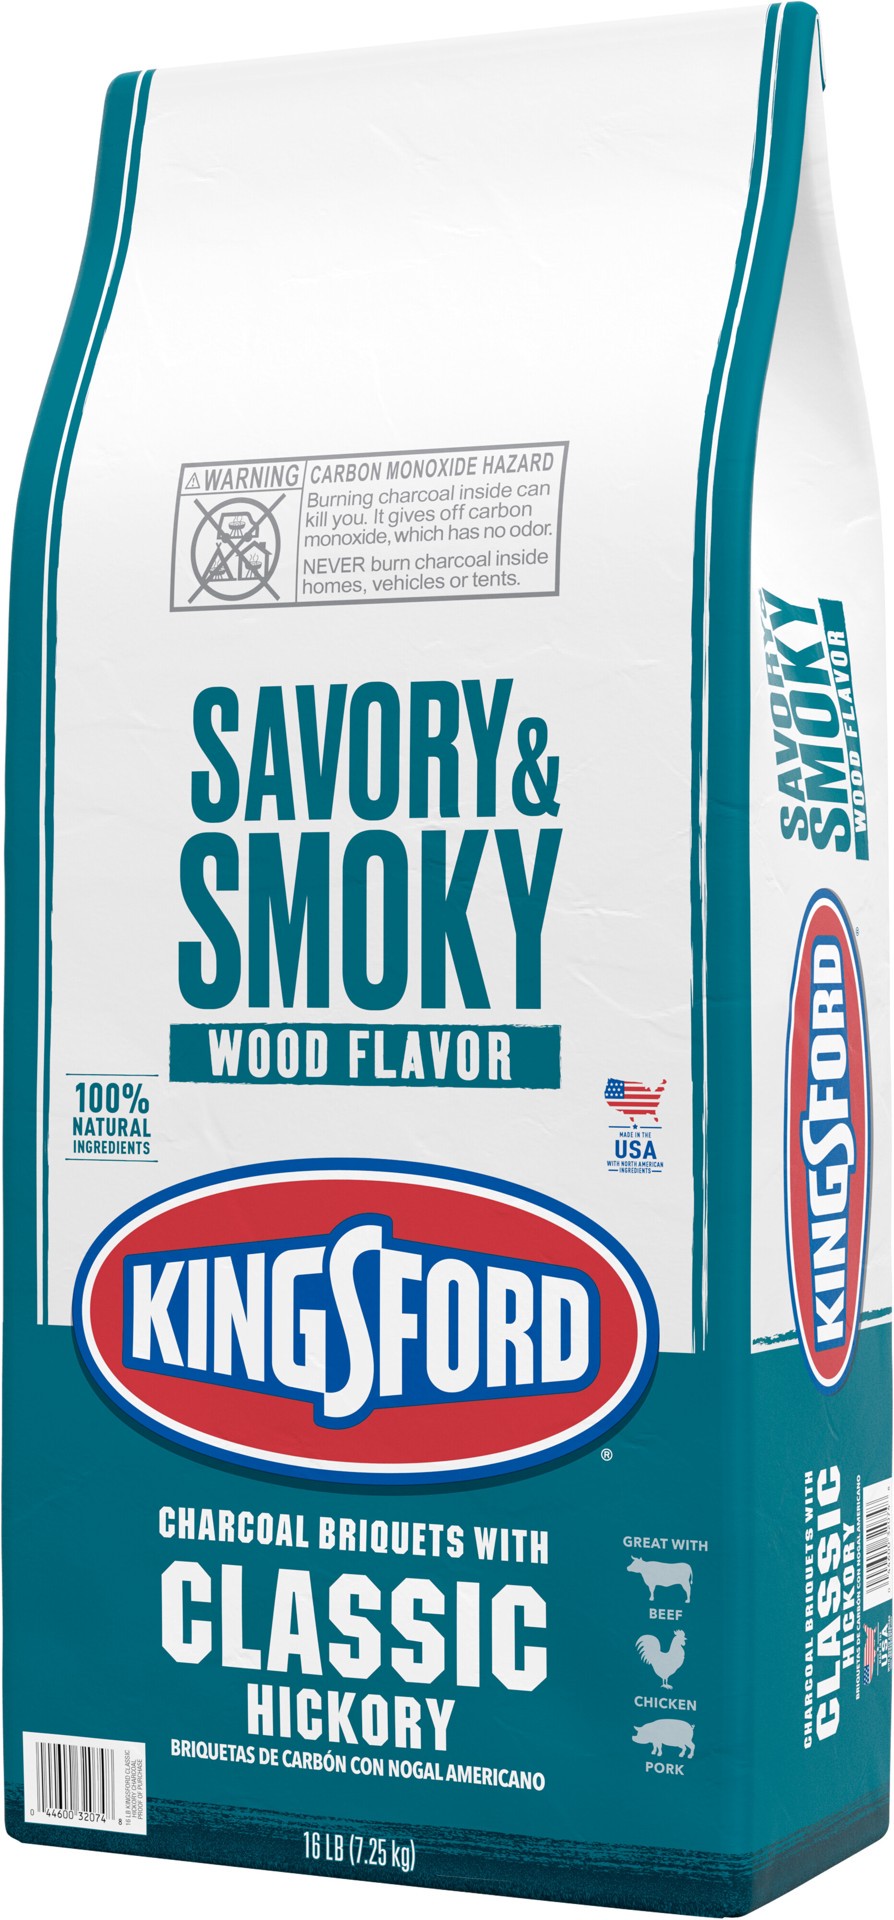 slide 5 of 5, Kingsford Charcoal with Classic Hickory Briquettes, 16 lb